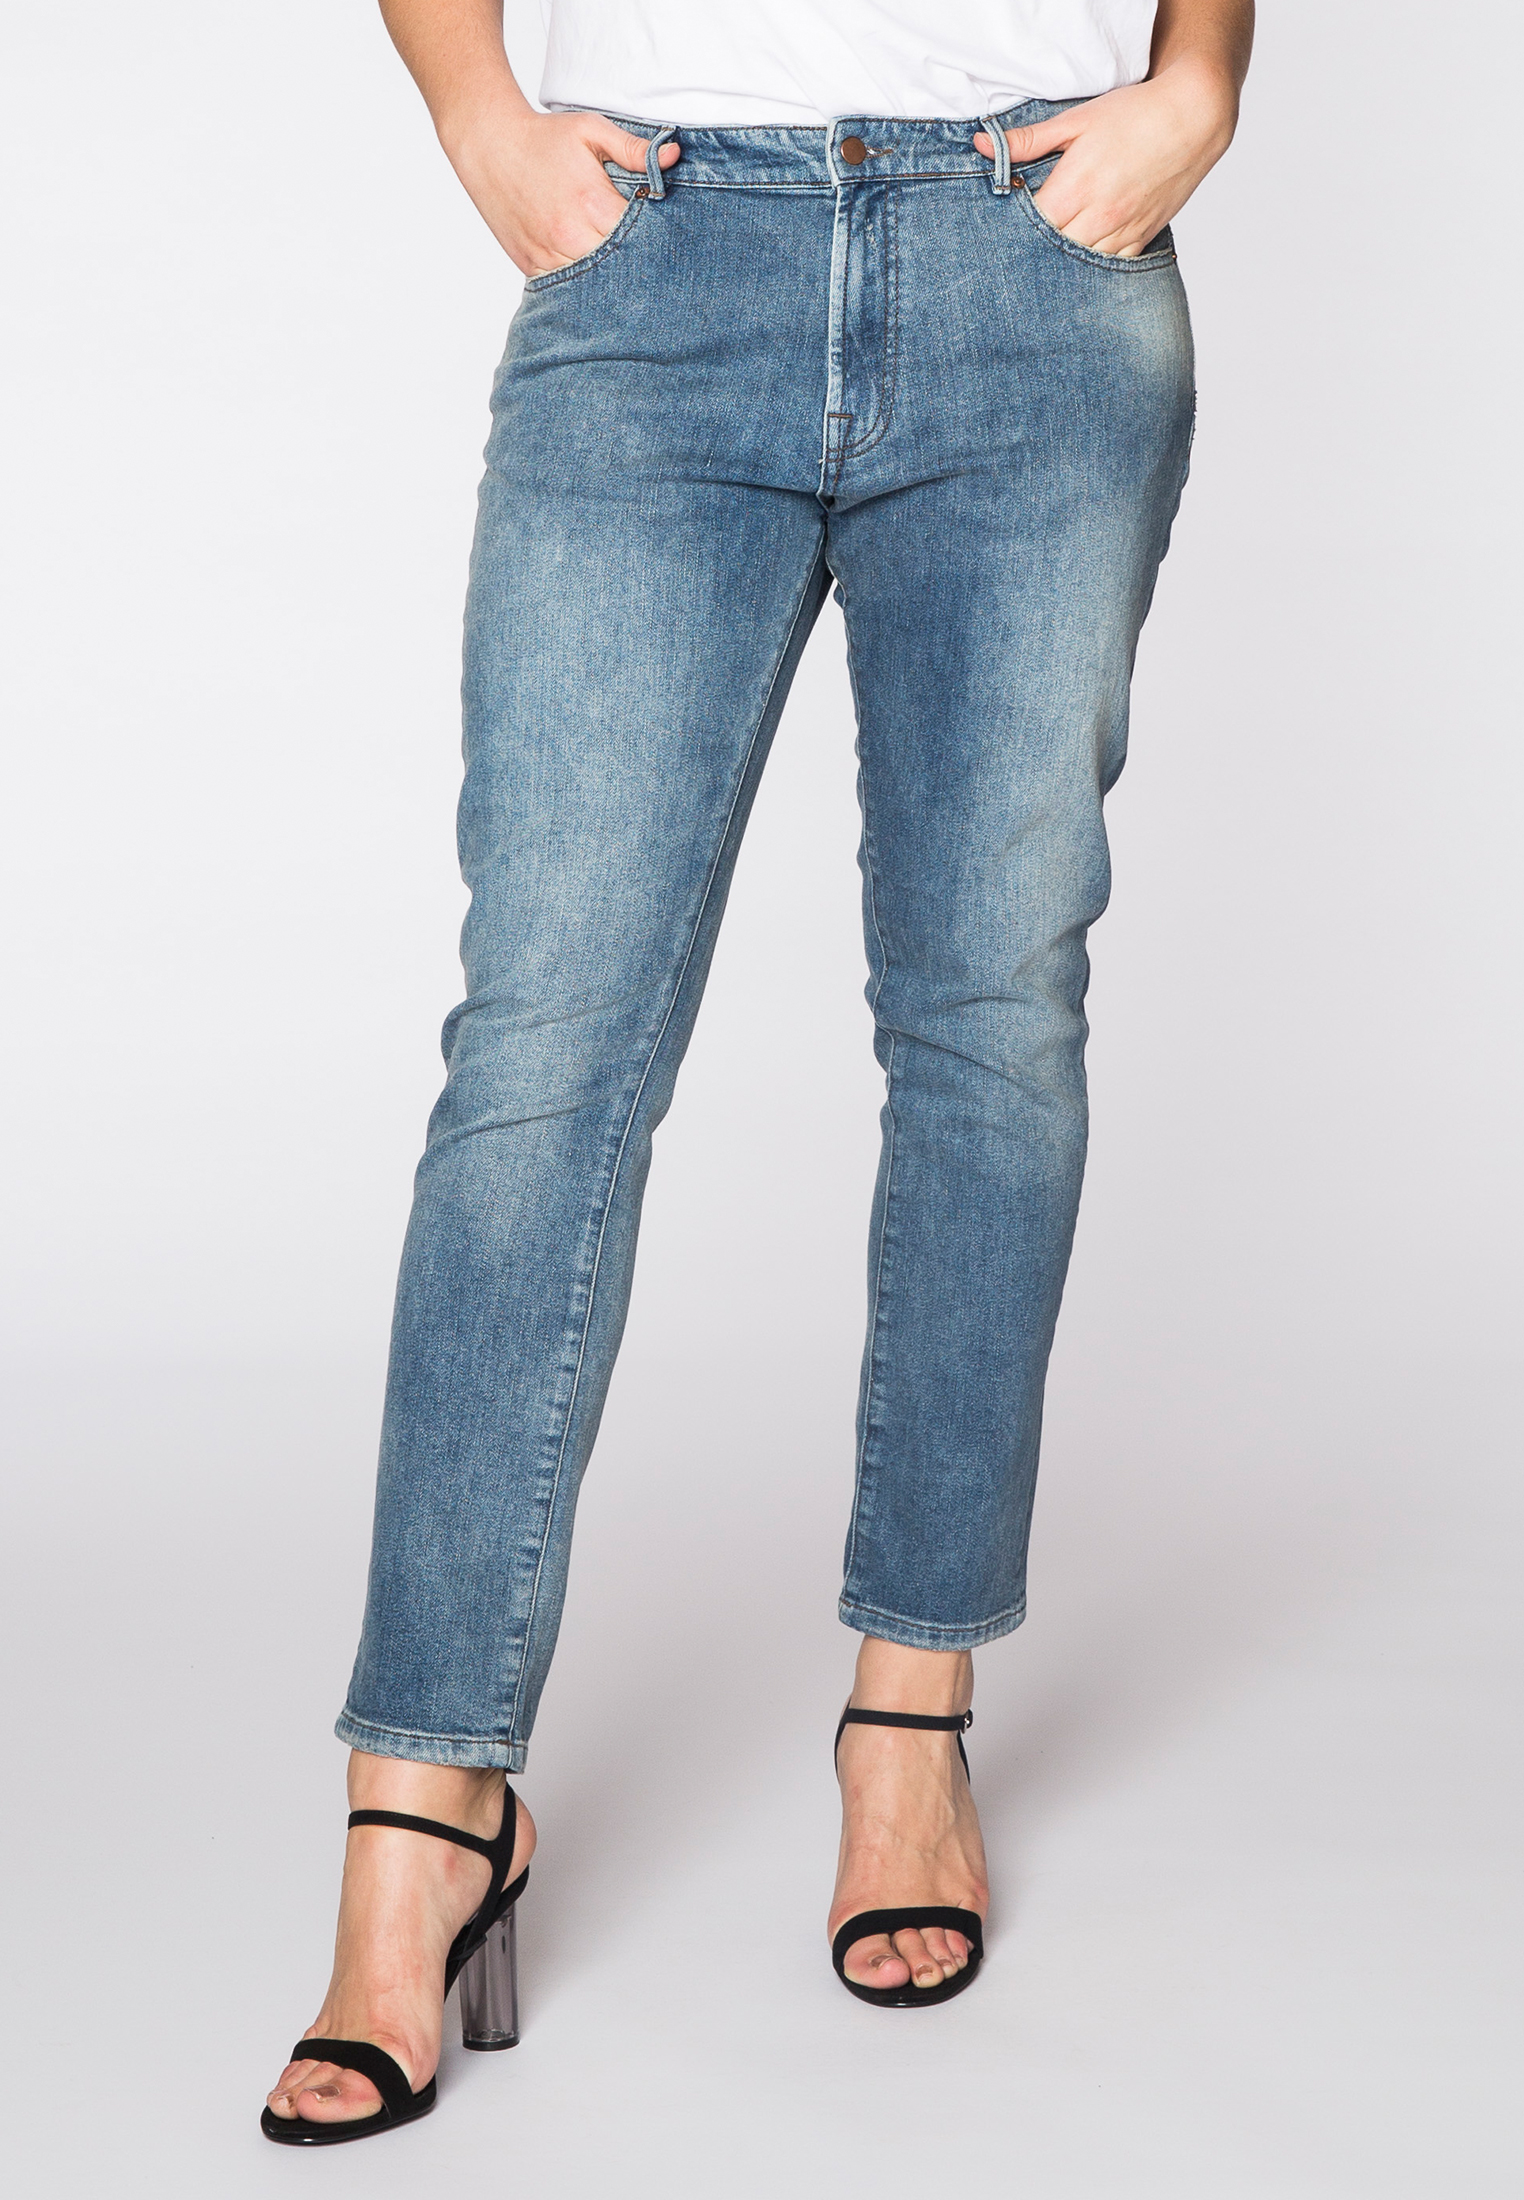 32 inch jeans in us size